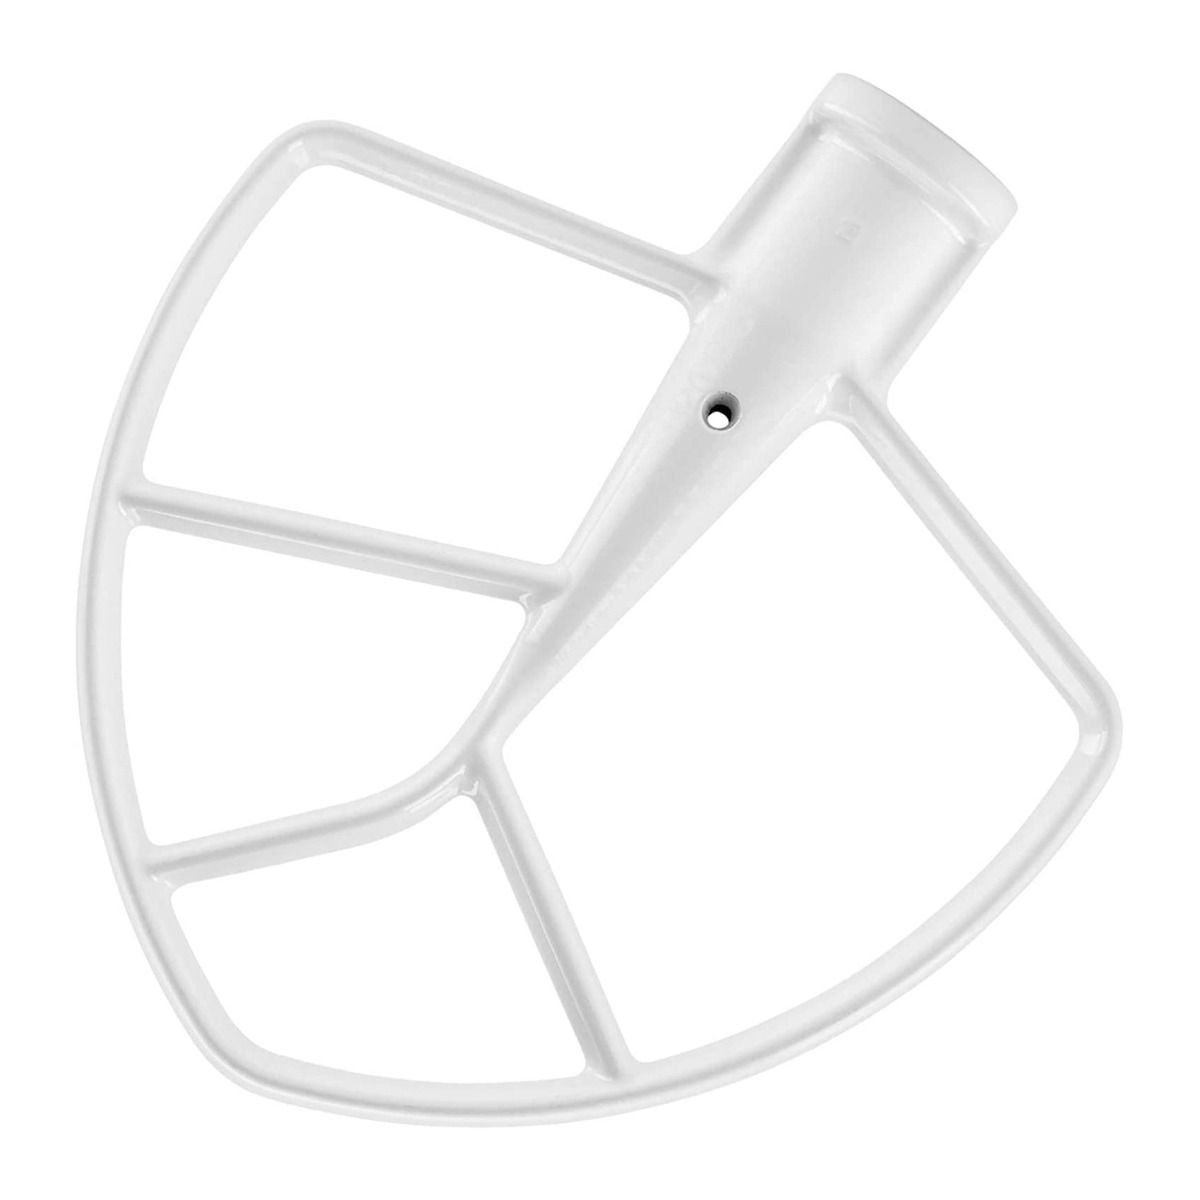  KitchenAid K45B Coated Flat Beater, White, 4.5 Qt: Electric  Mixer Replacement Parts: Home & Kitchen